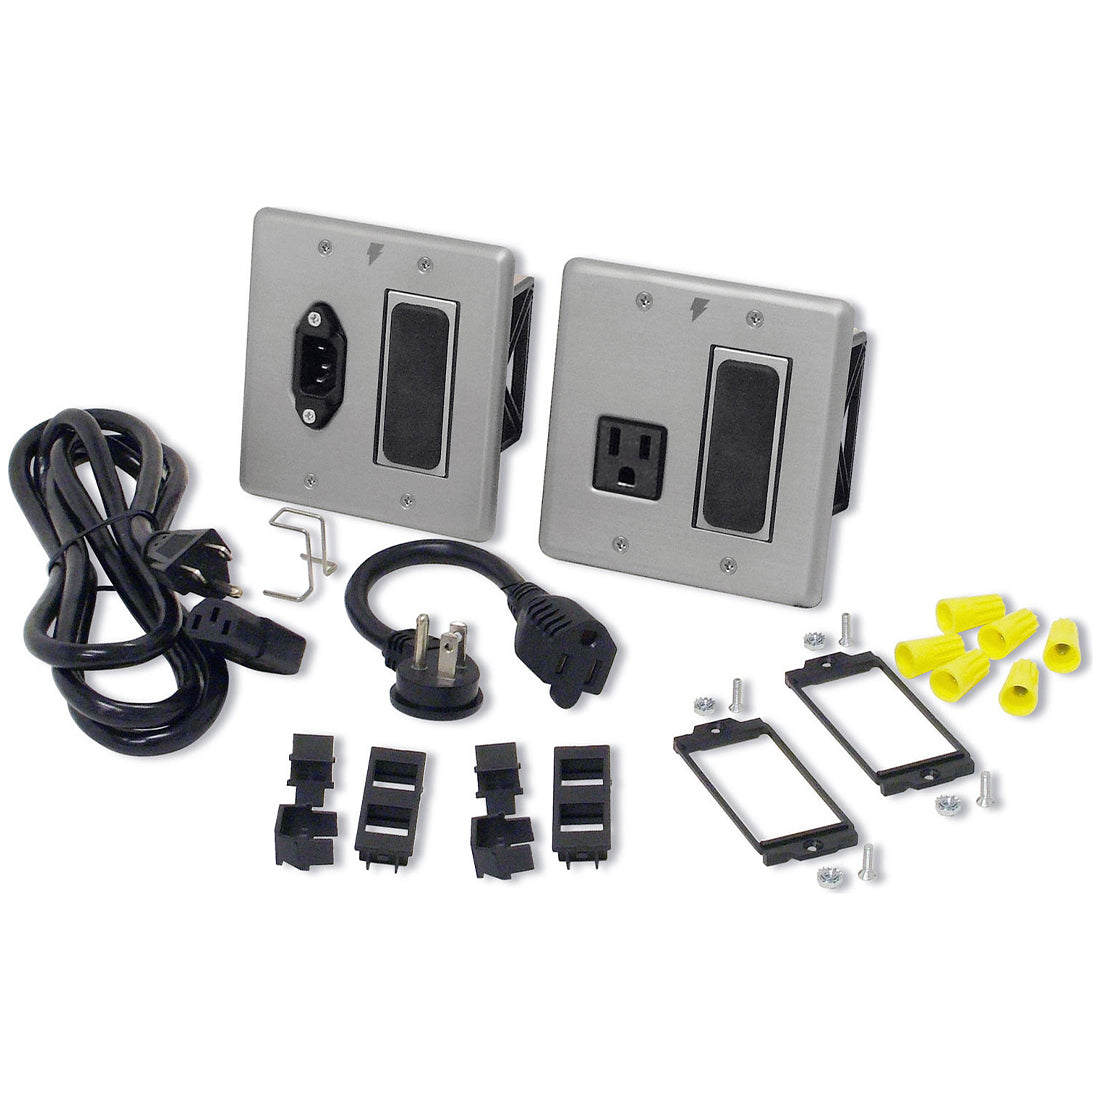 Furman MIW-XT Max-In-Wall Power & Signal Bay, 15A Code Compliant Extension System